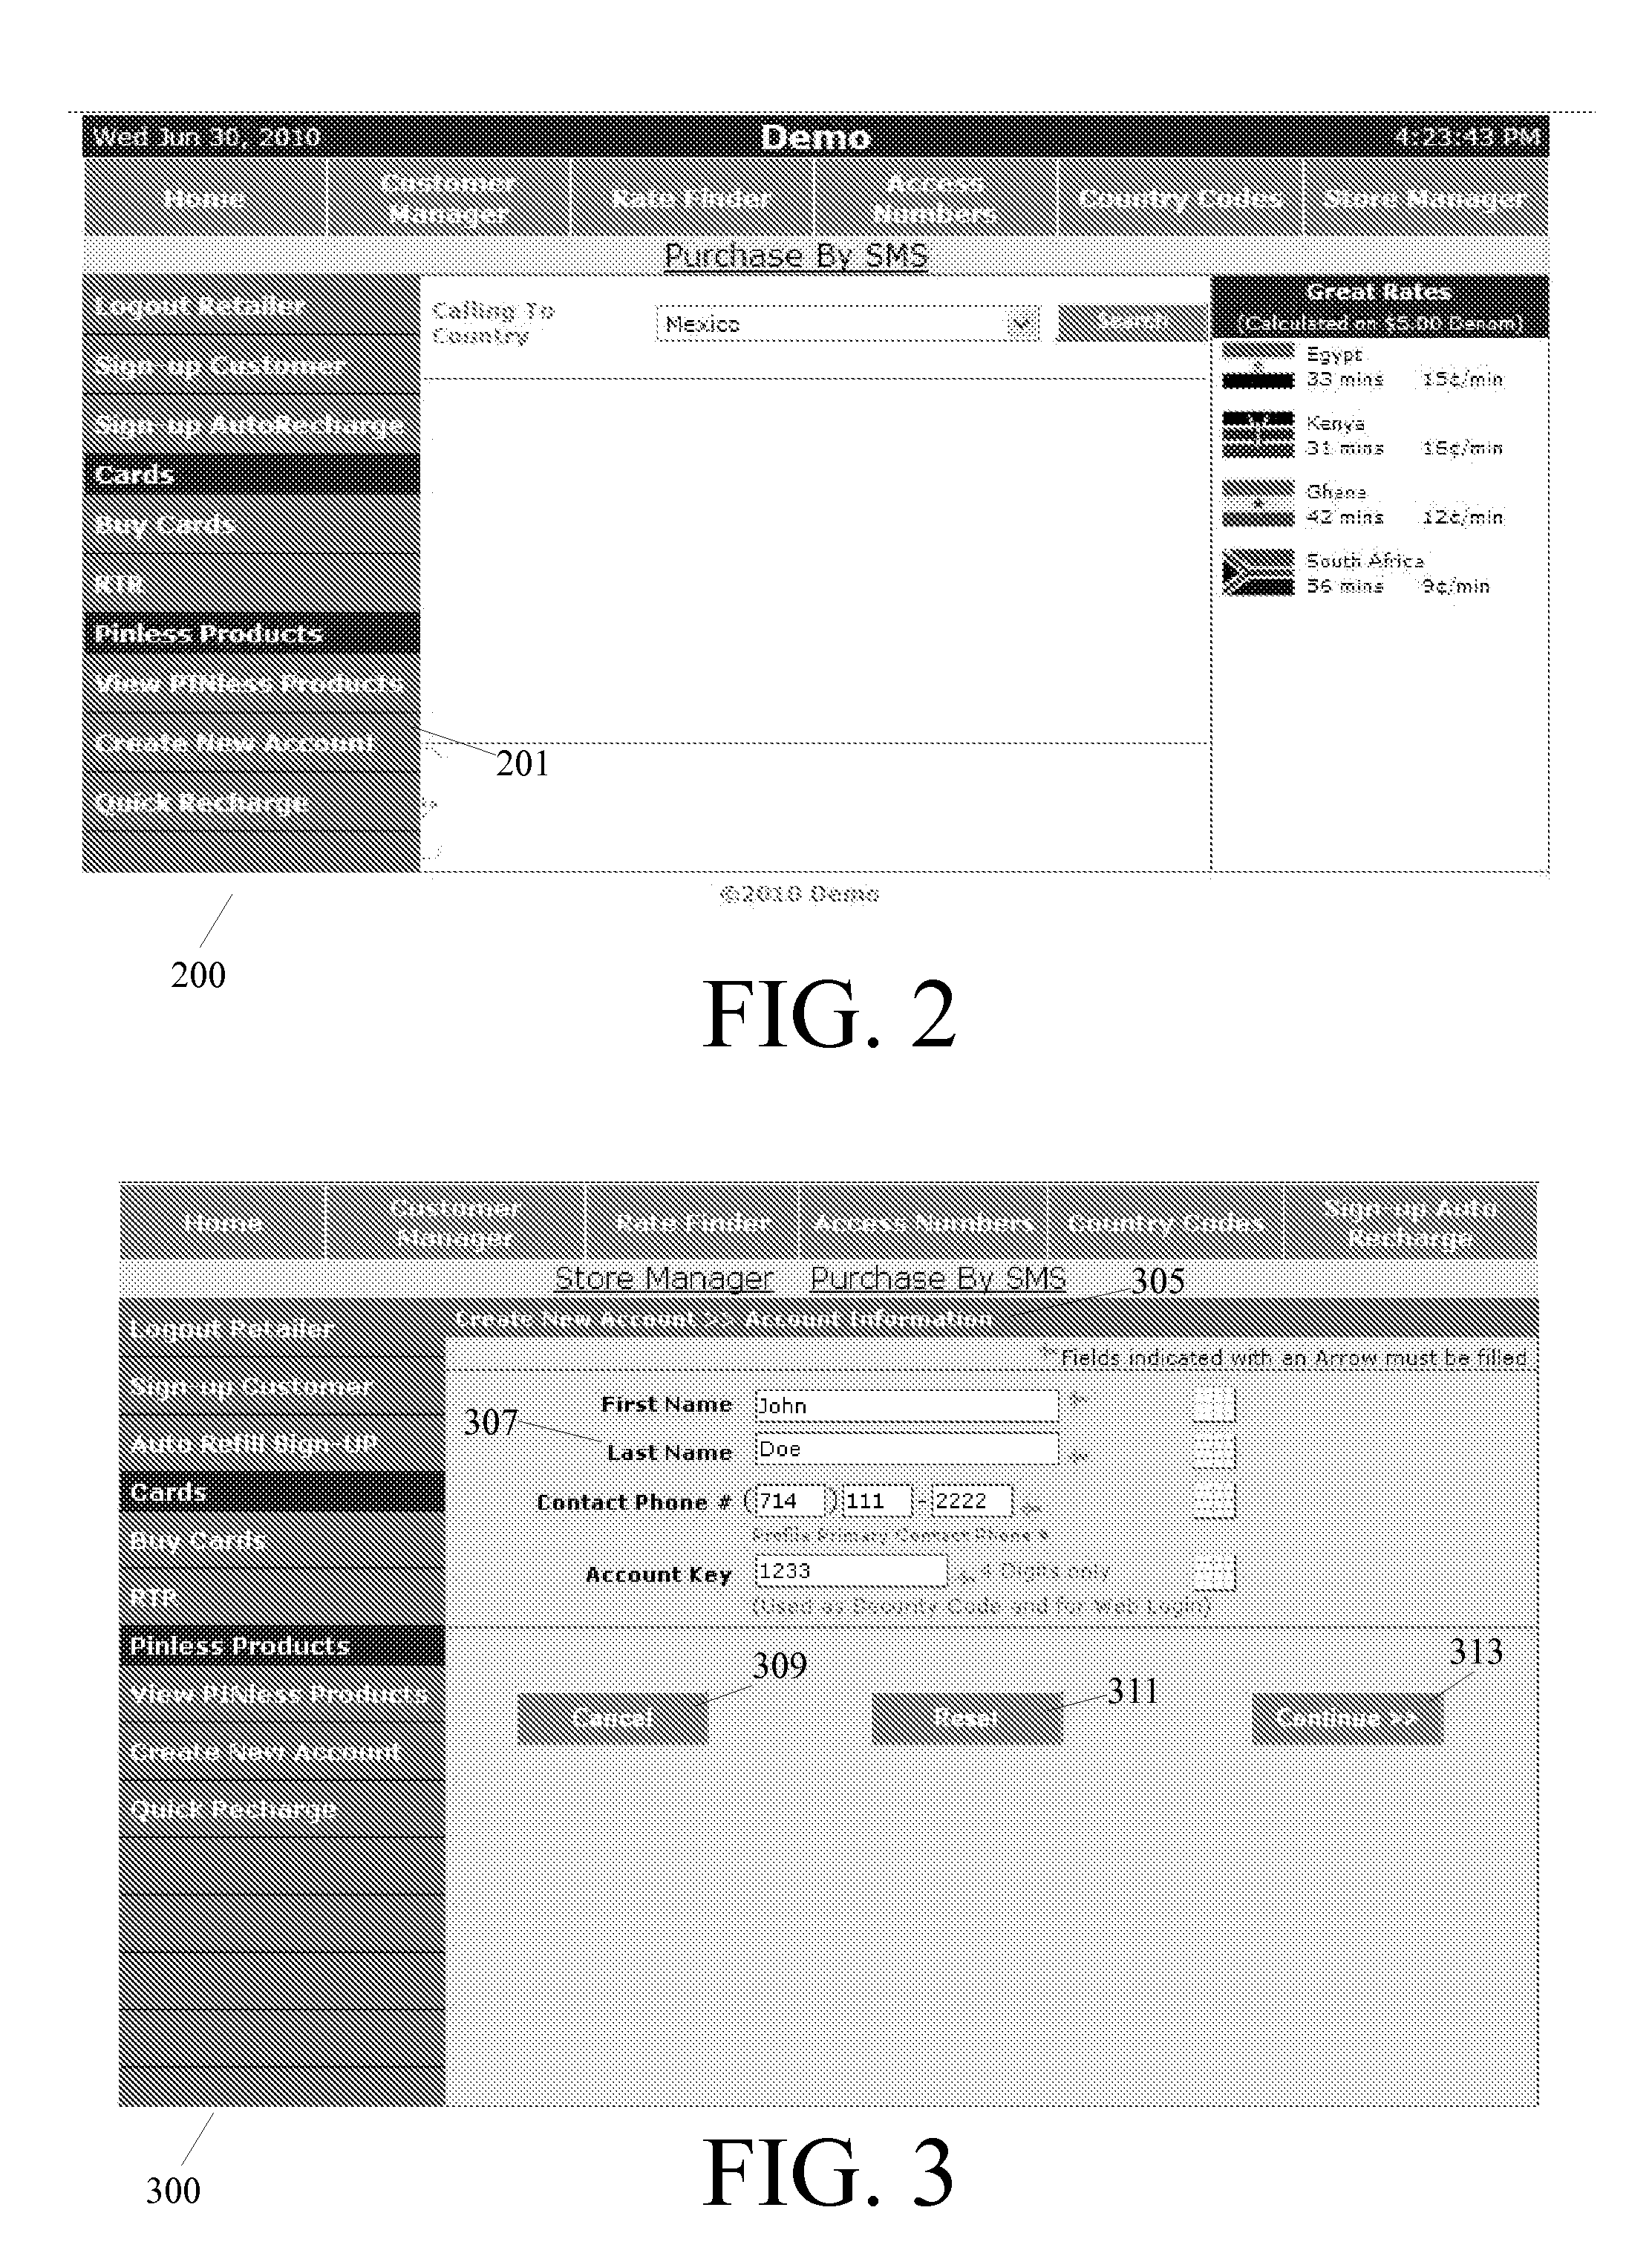 System and method for automated prepaid wireless phone refills